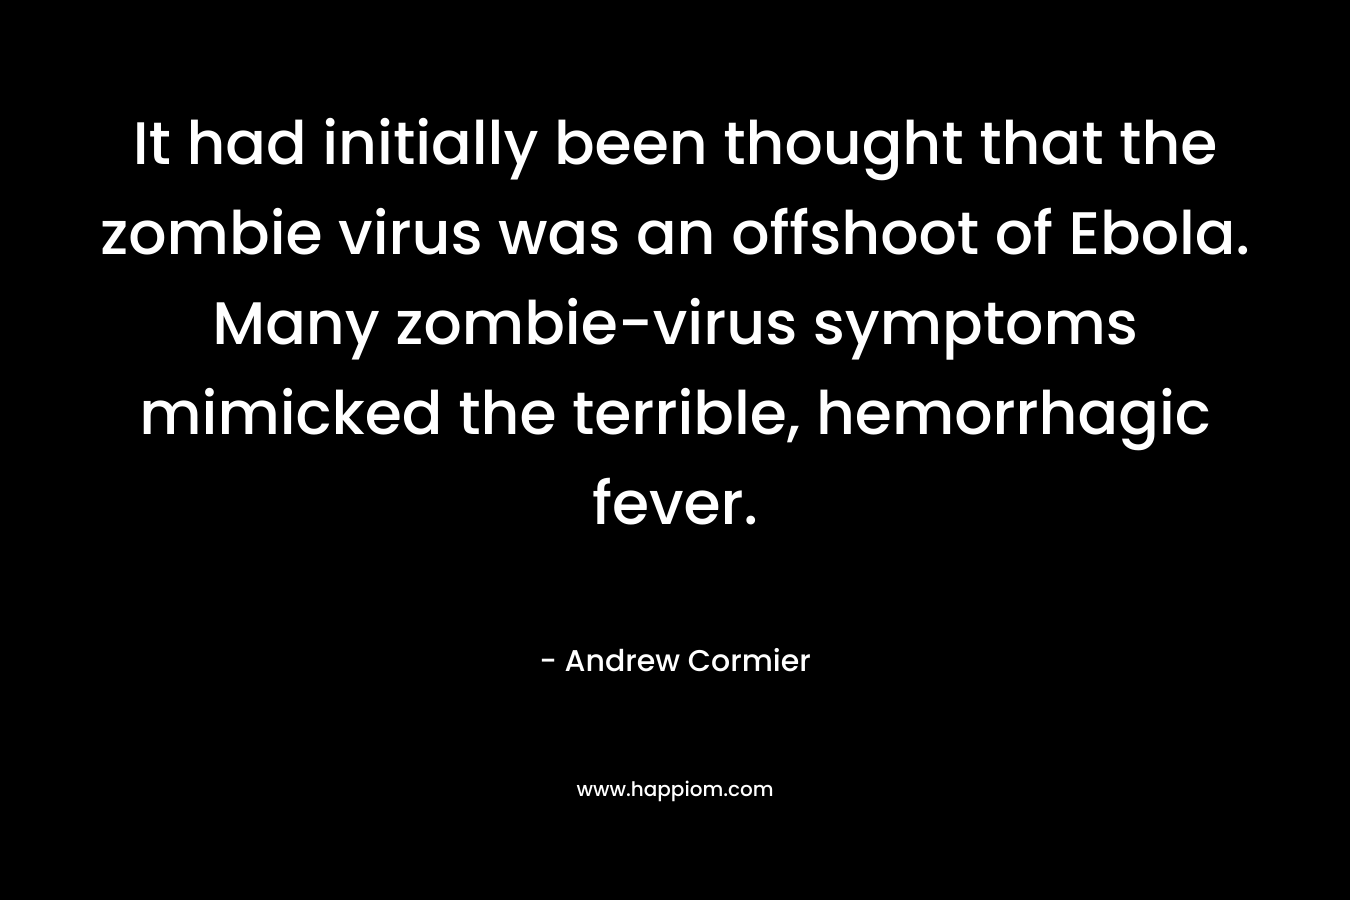 It had initially been thought that the zombie virus was an offshoot of Ebola. Many zombie-virus symptoms mimicked the terrible, hemorrhagic fever. – Andrew Cormier